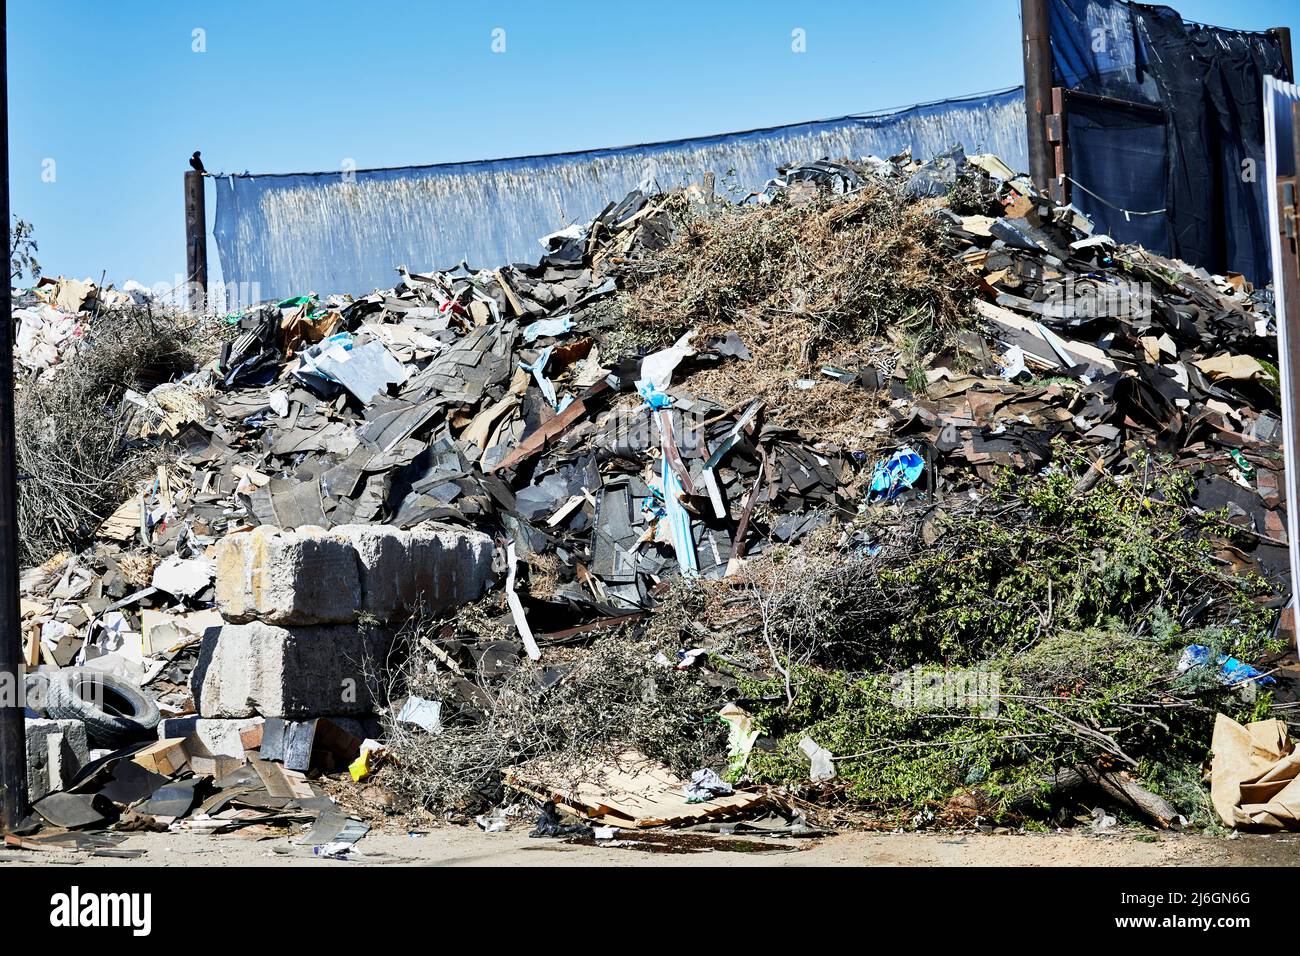 Pile of Various Types of Trash disposed of at a Landfill Stock Photo